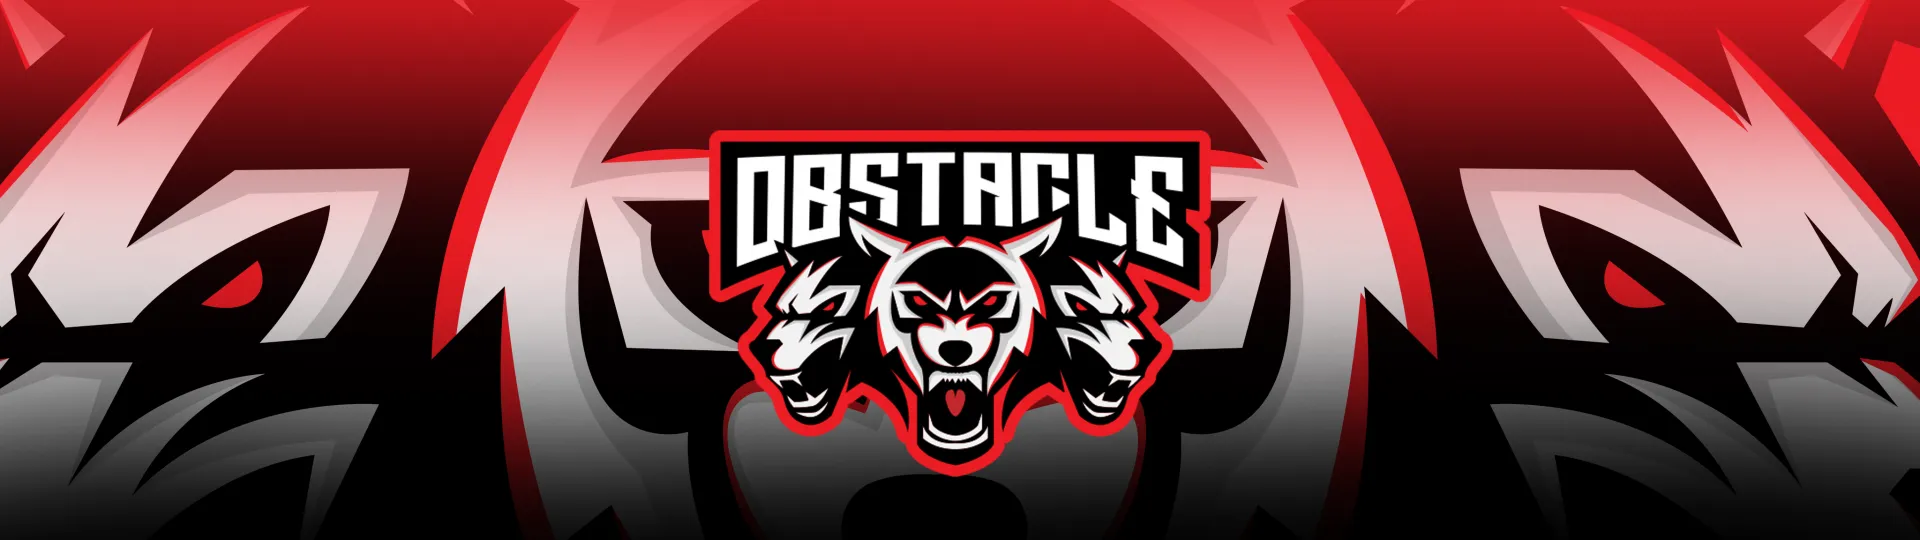 Obstacle Gaming banner